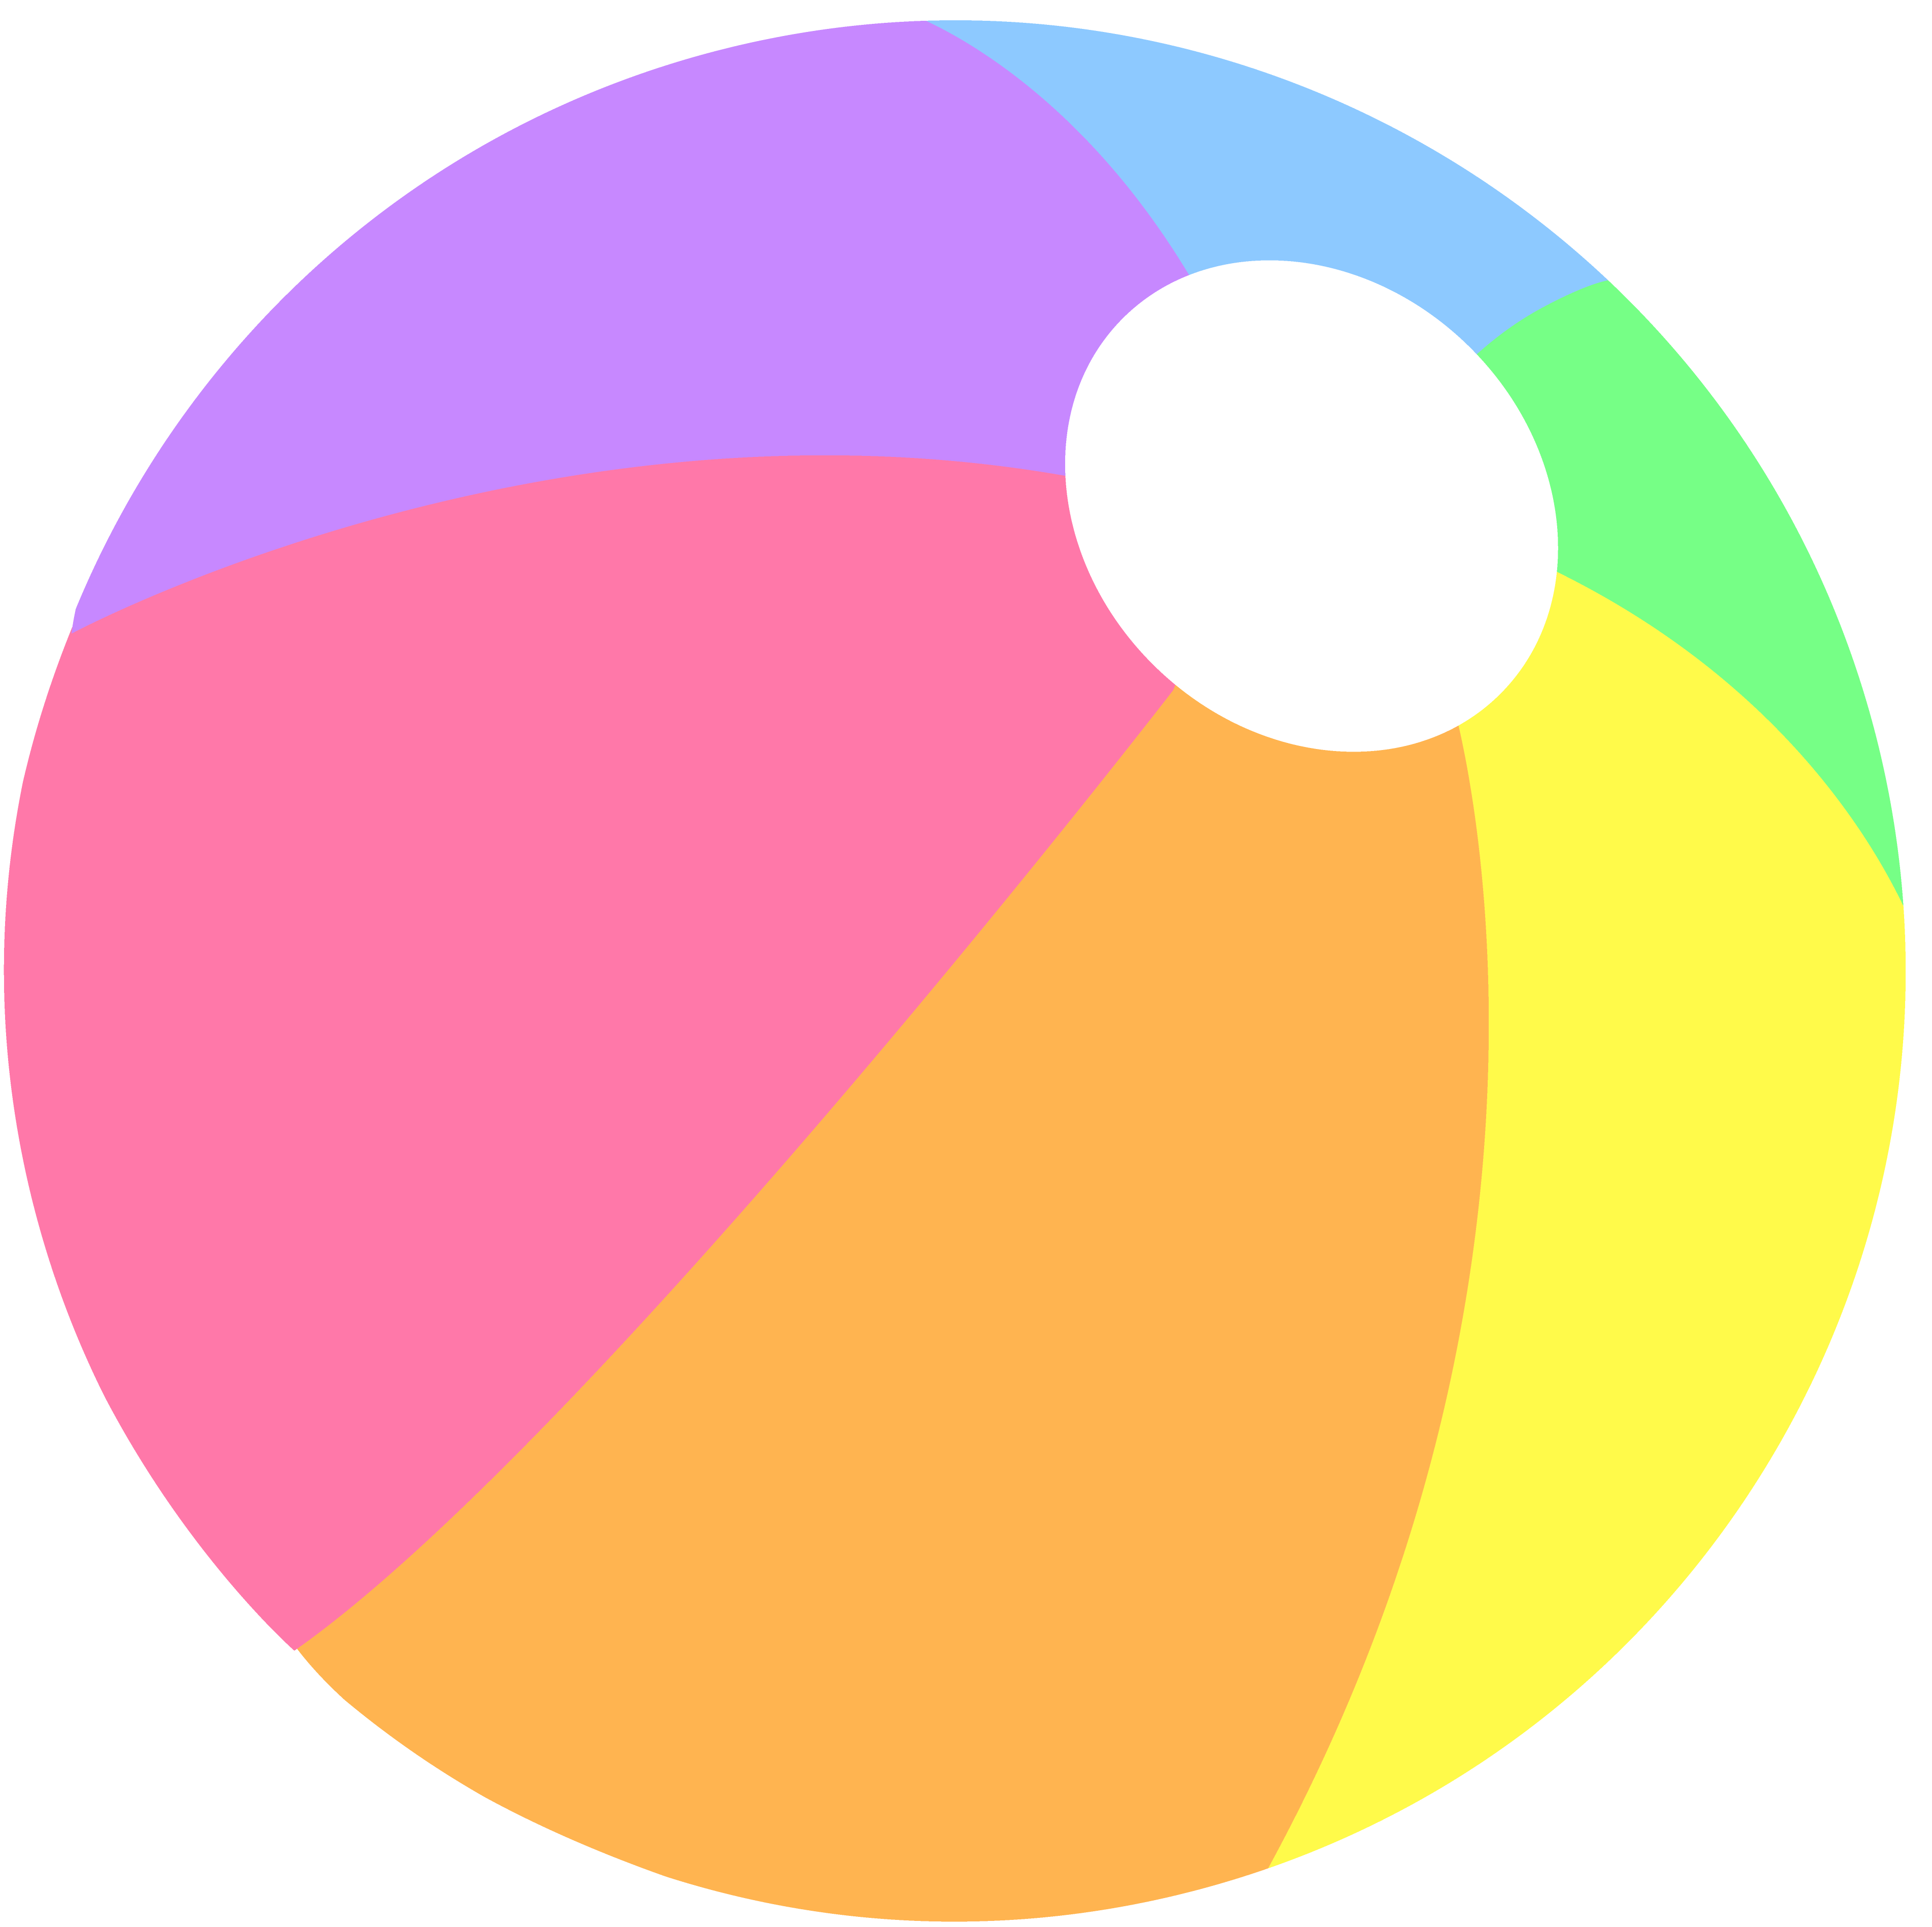 Beach Ball in Pastel Colors.